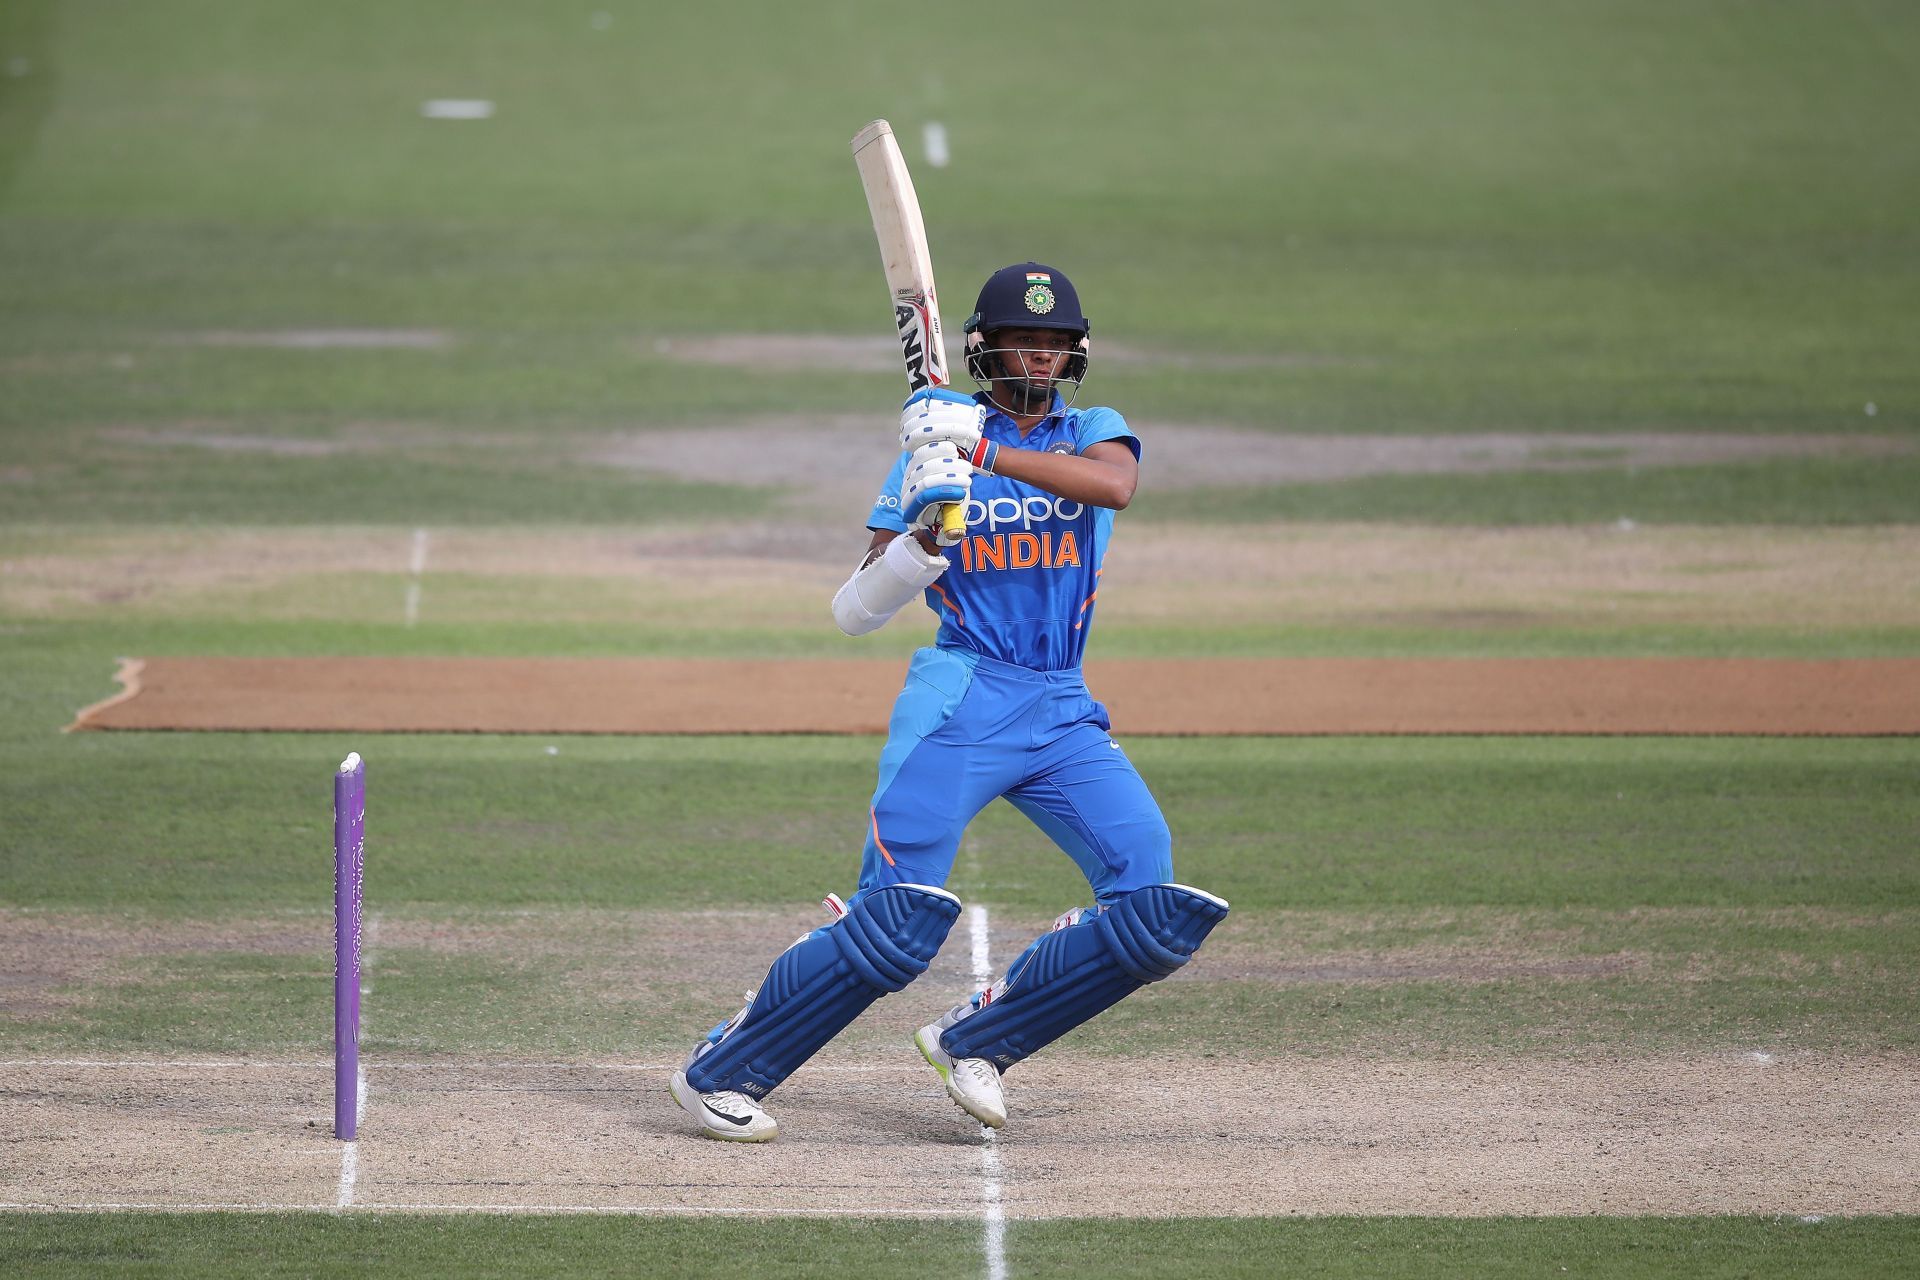 Jaiswal weill be looking to have a breakout IPL season